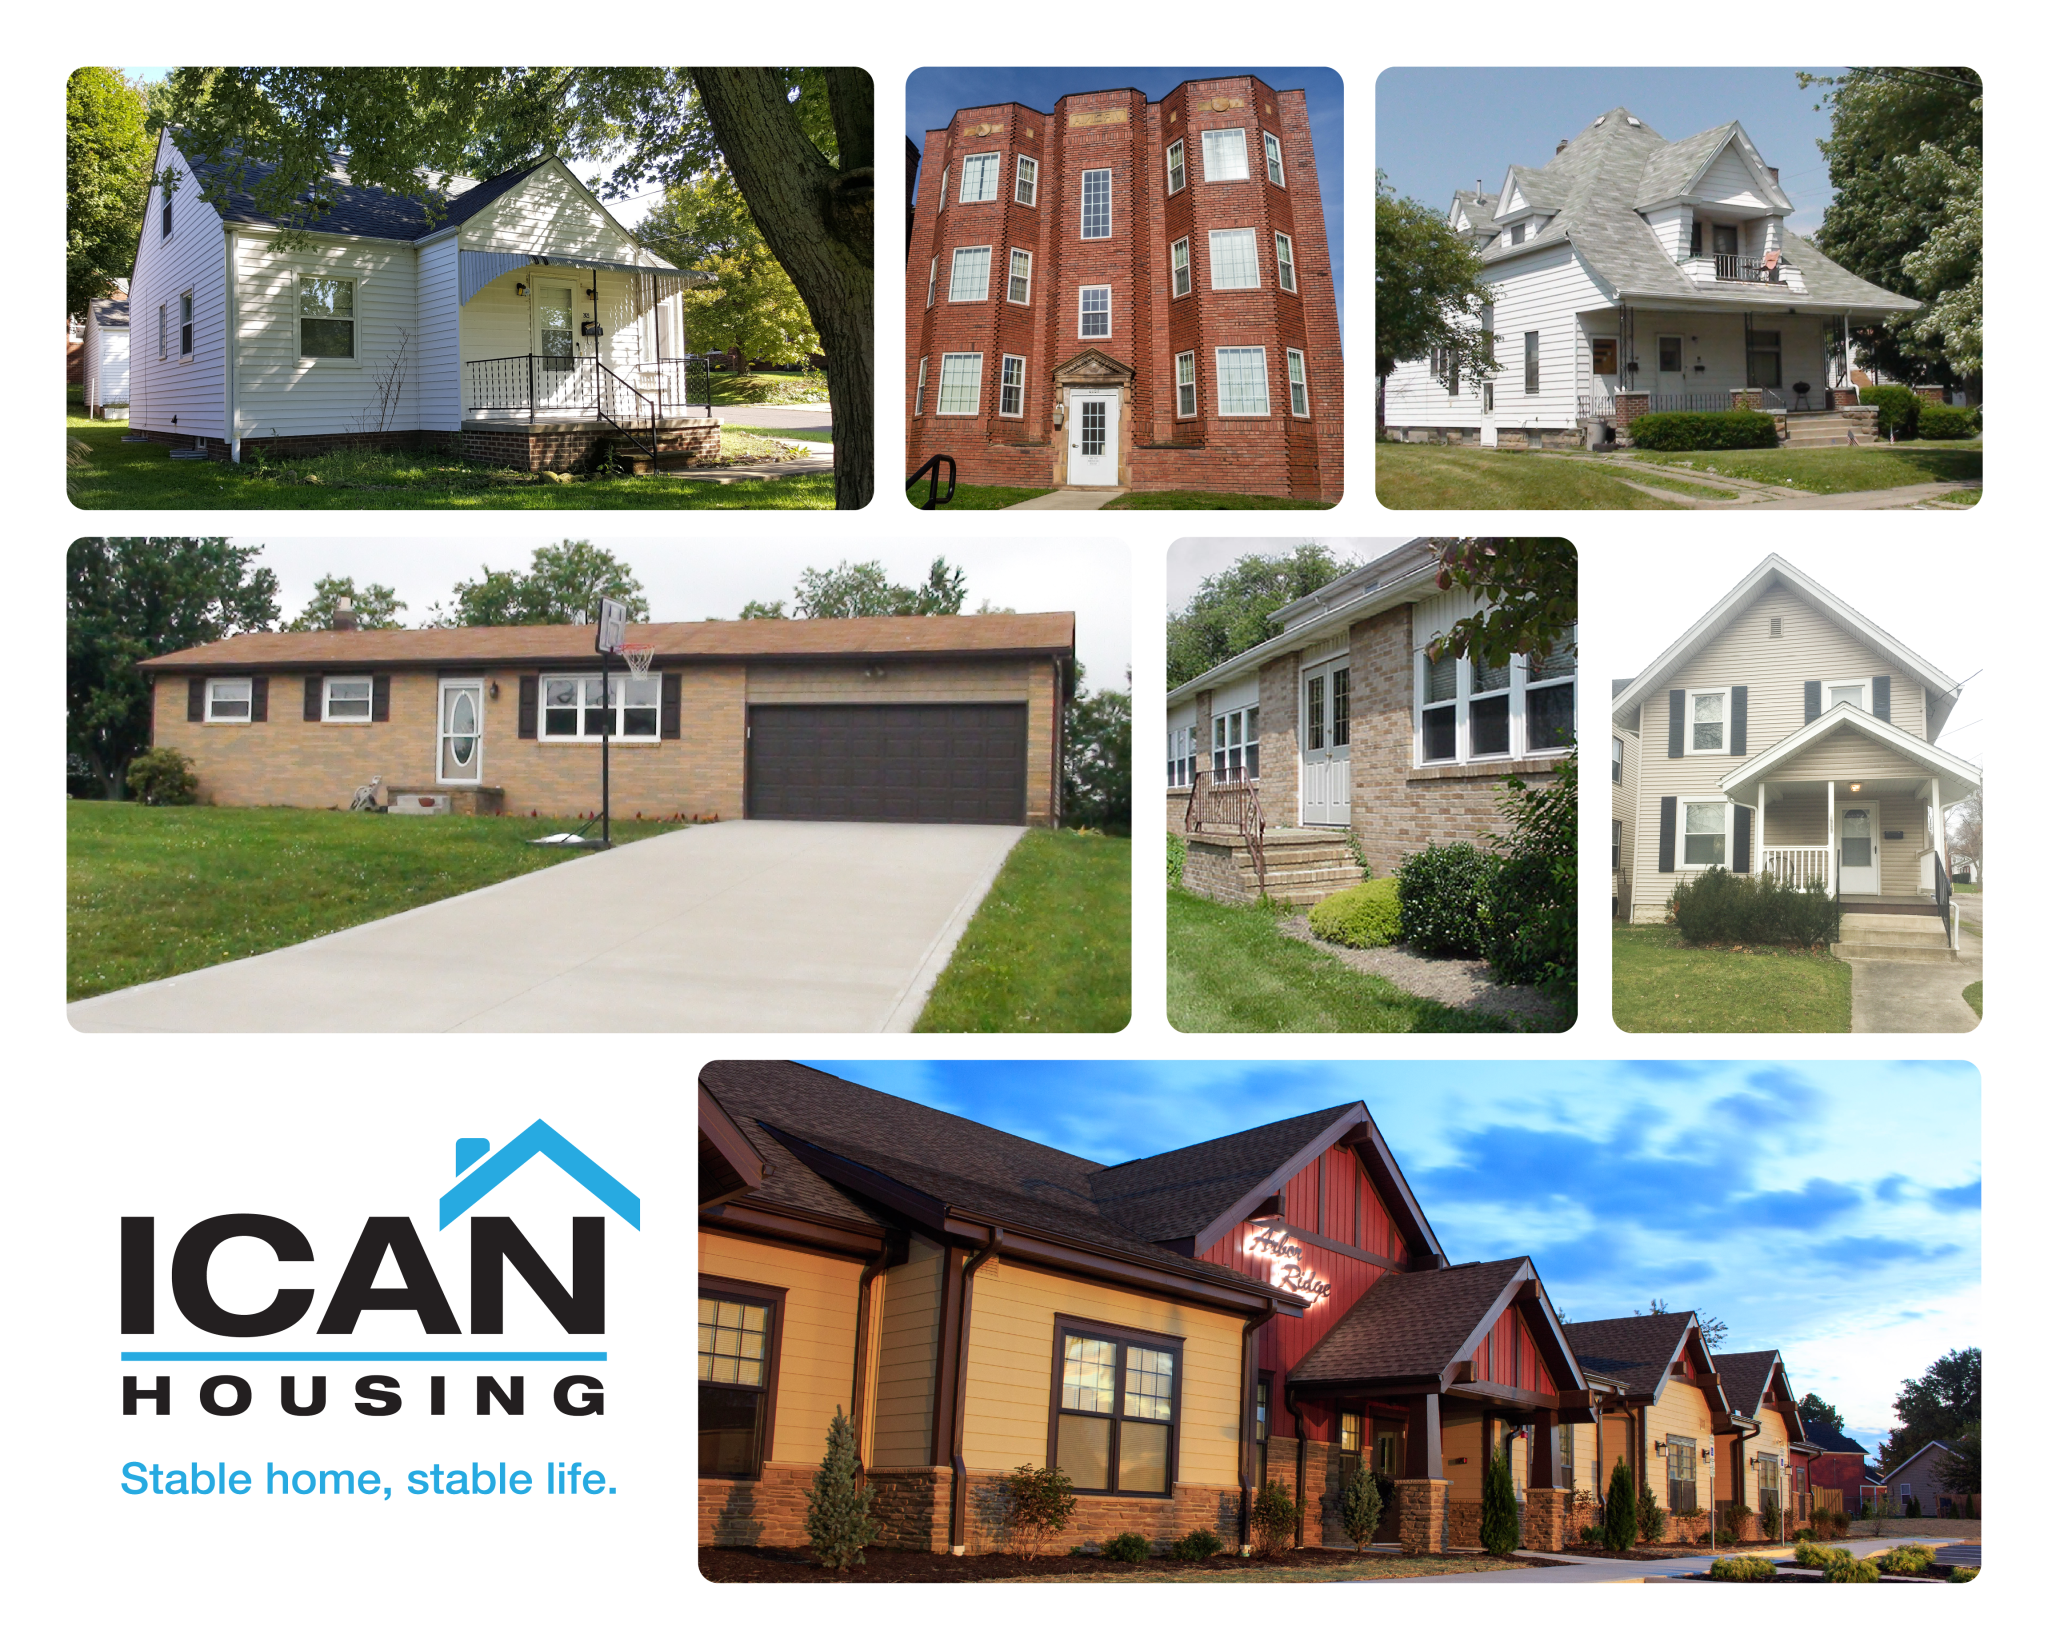 Photos - Our Properties Page (Top Right) - 4.8.22 - Larger 1 - Additional Row - Arbor Ridge